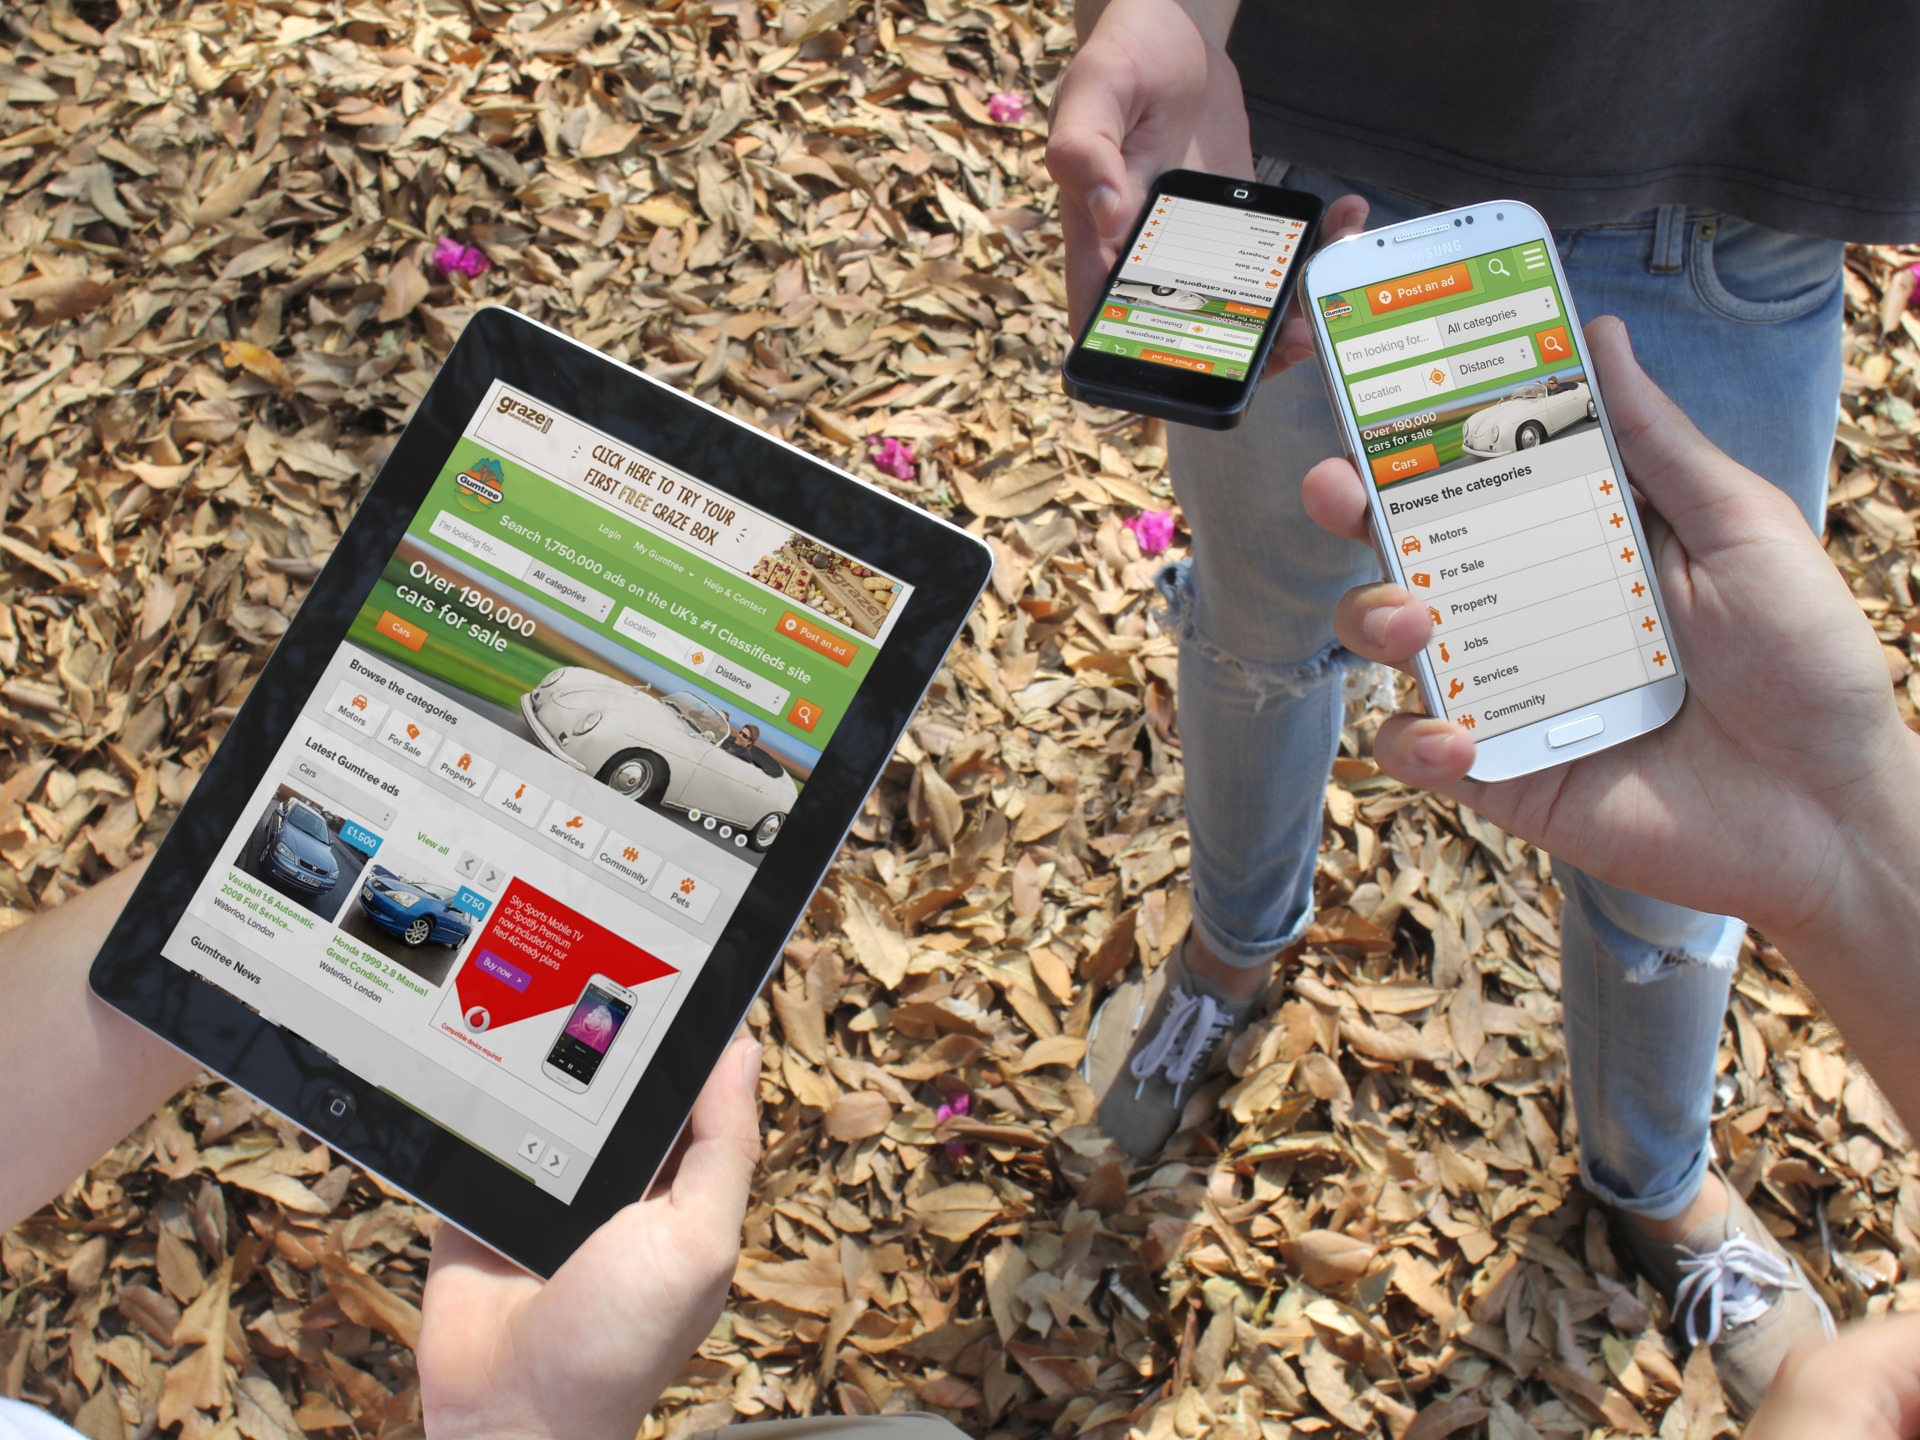 Gumtree Launches Responsive Website and Updated iPad App